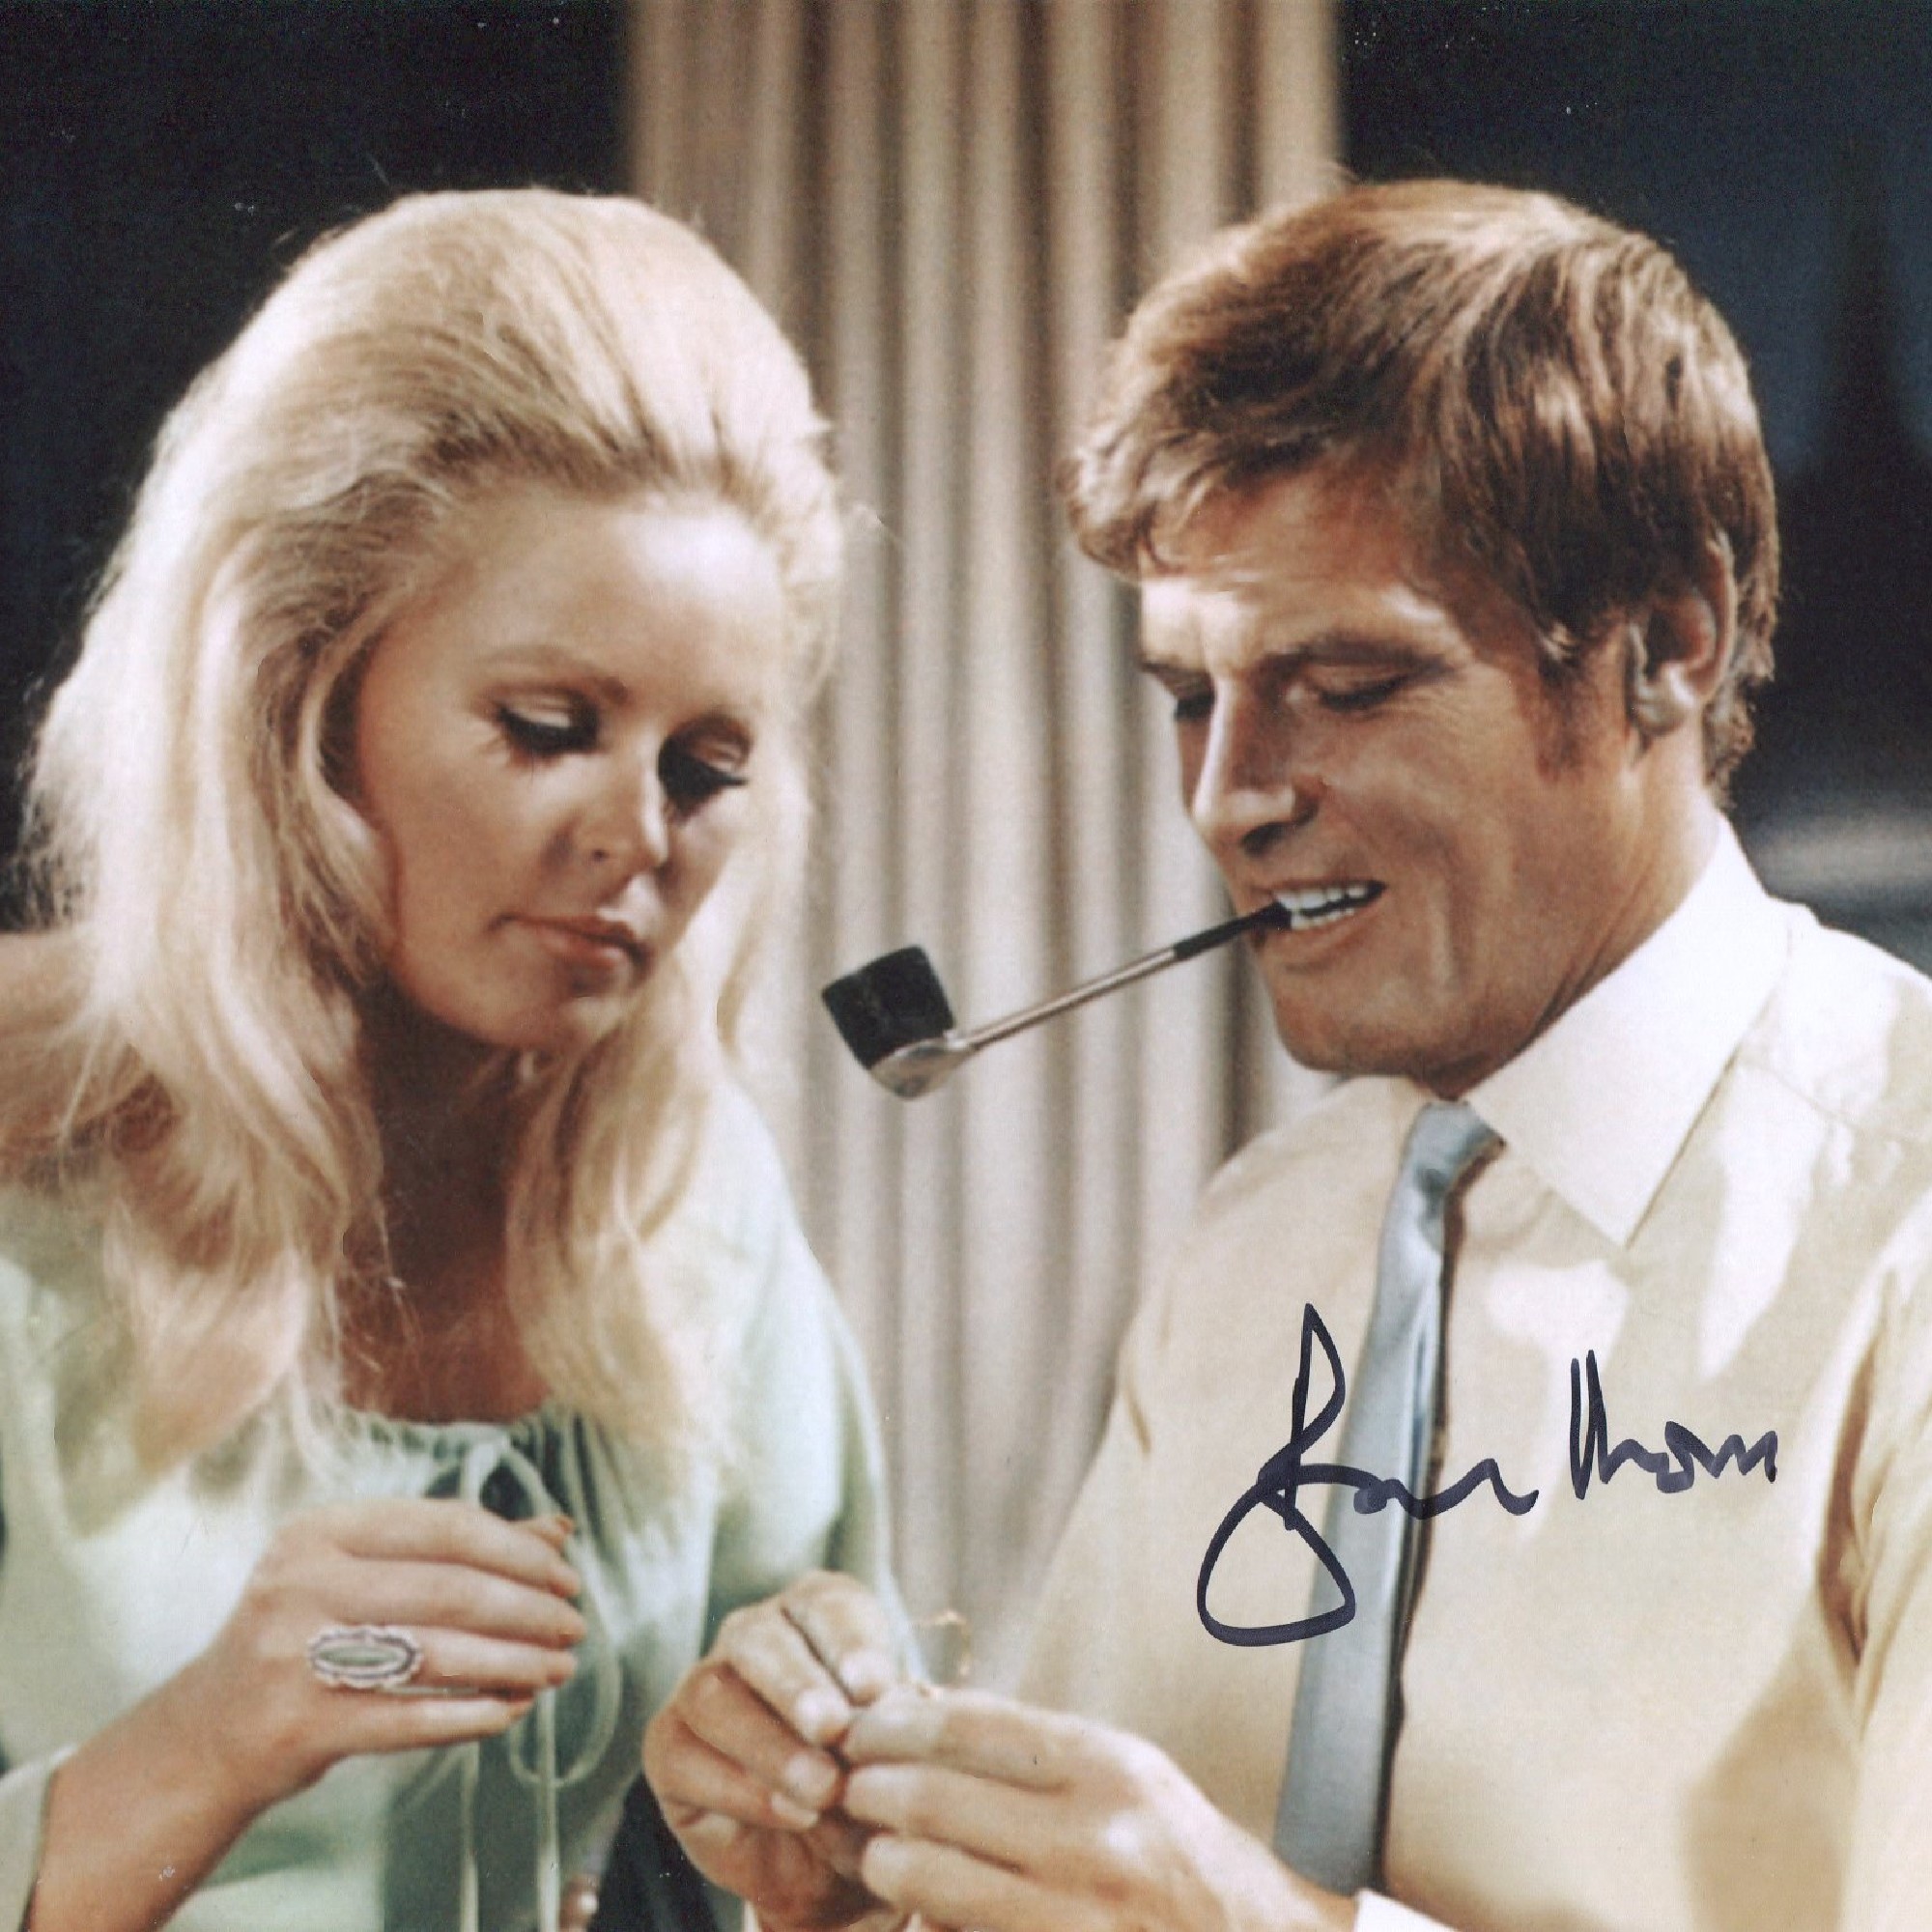 Roger Moore signed 8x10 photo from the TV series 'The saint'. Good condition. All autographs come